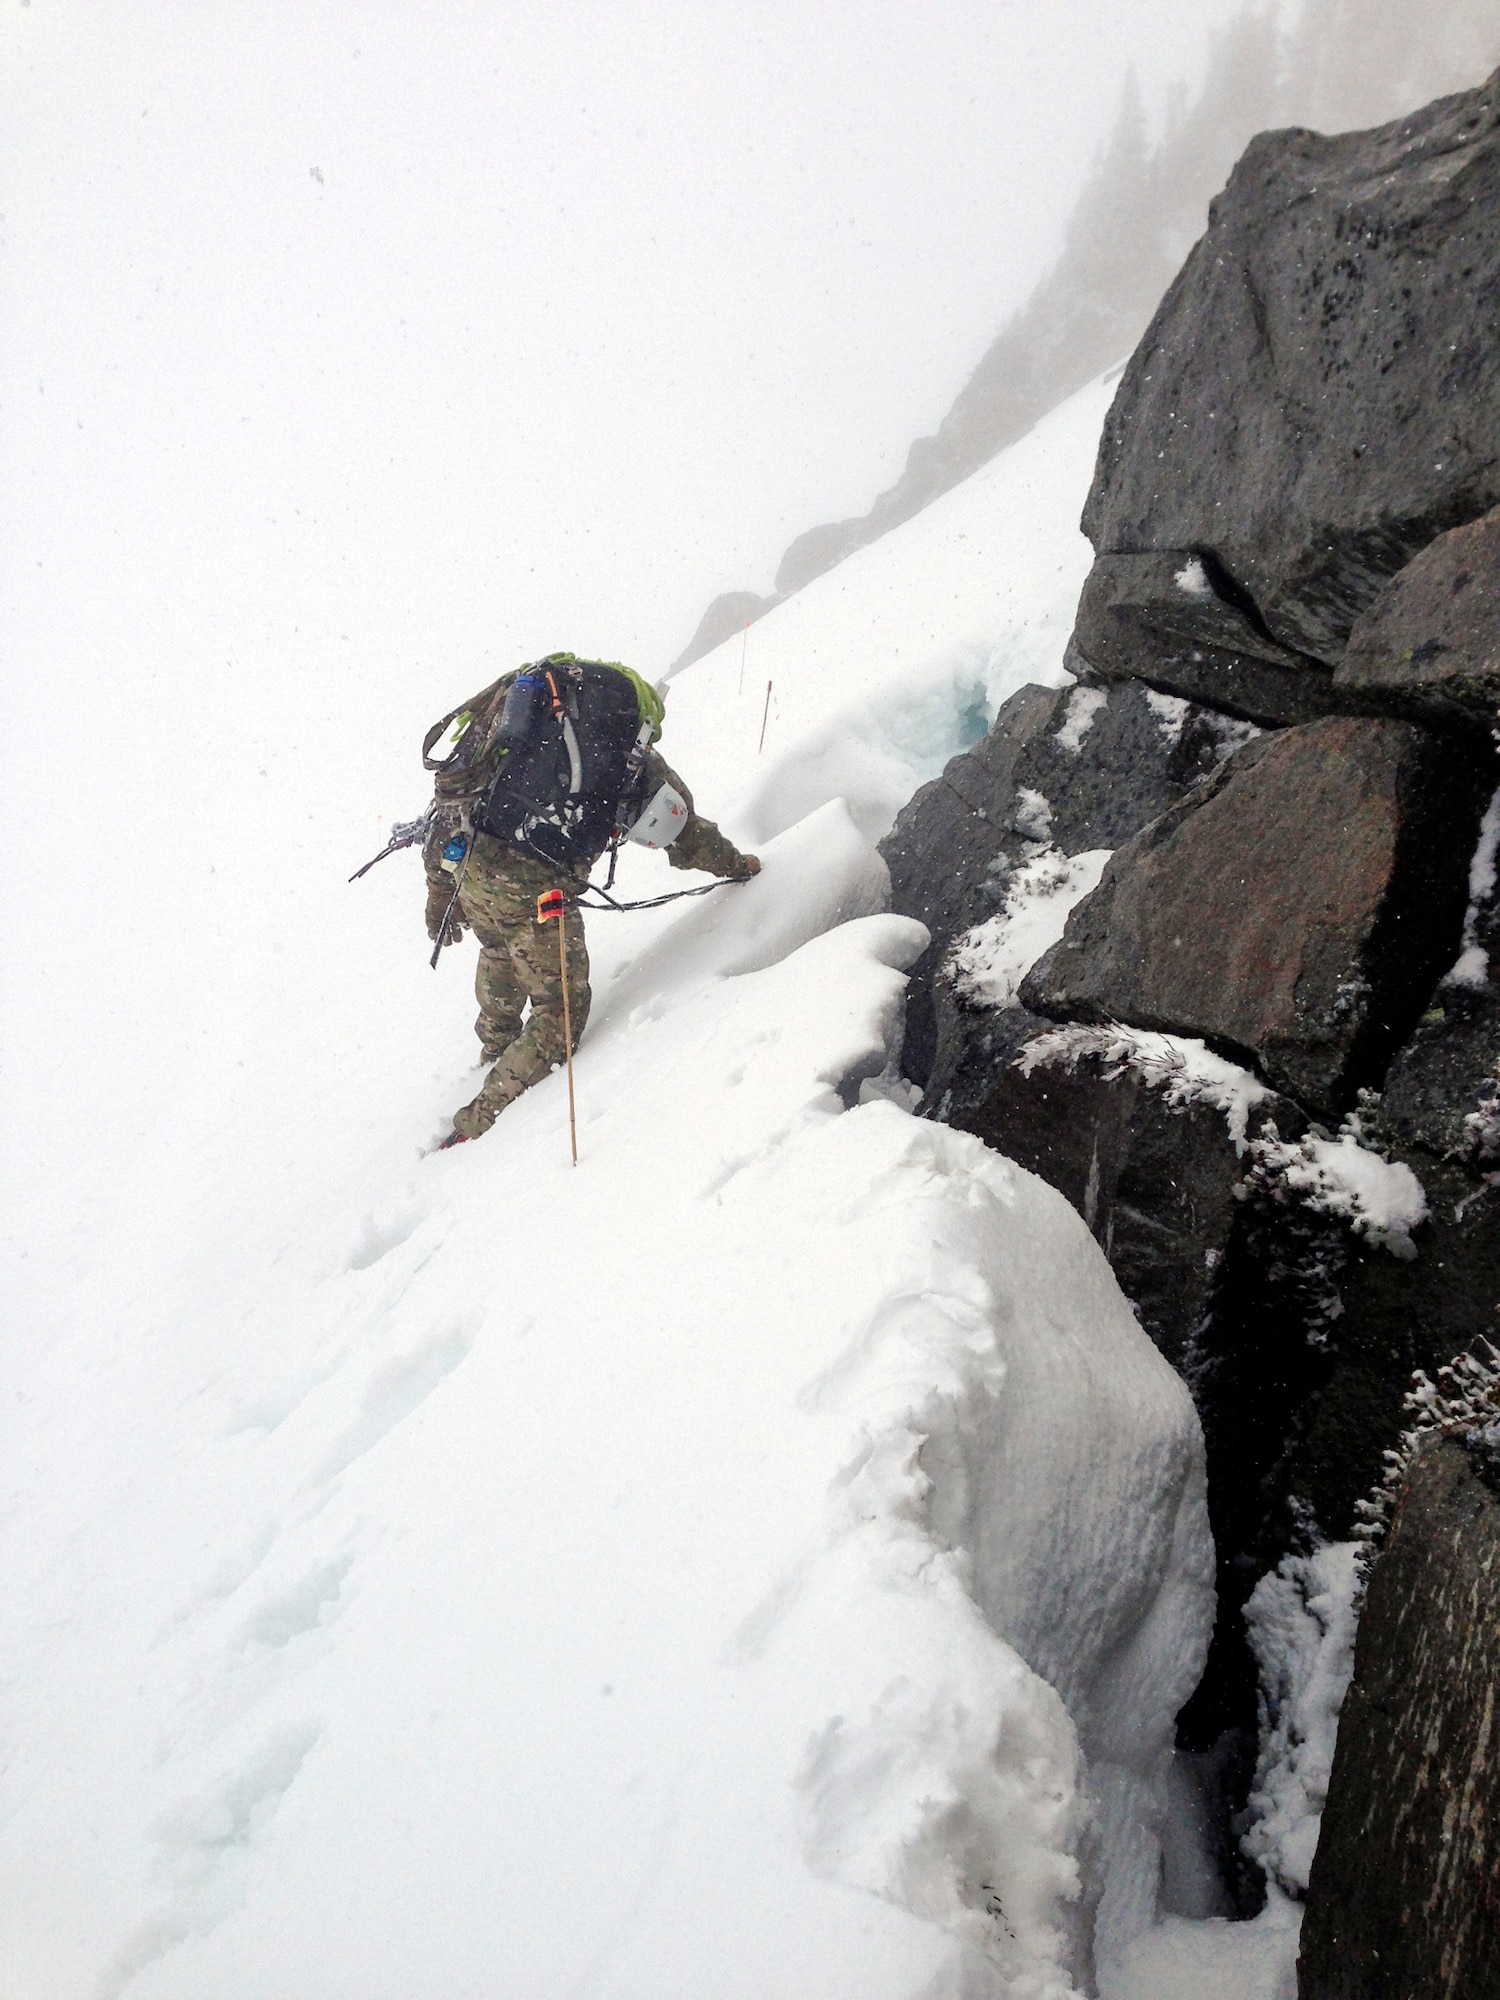 2nd Lt. Ryan McQuillan, 22nd Special Tactics Squadron officer in charge weapons and tactics, climbs down the steep grade of the mountain May 28, 2014, en route to rescue an injured climber on Mount Rainier, Wash. McQuillan trained side by side with pararescuemen in Afghanistan in 2005 on a high altitude rescue team working hoist operations making his experience vital to the success of this mission. (U.S. Air Force photo/Master Sgt. Kim Brewer)